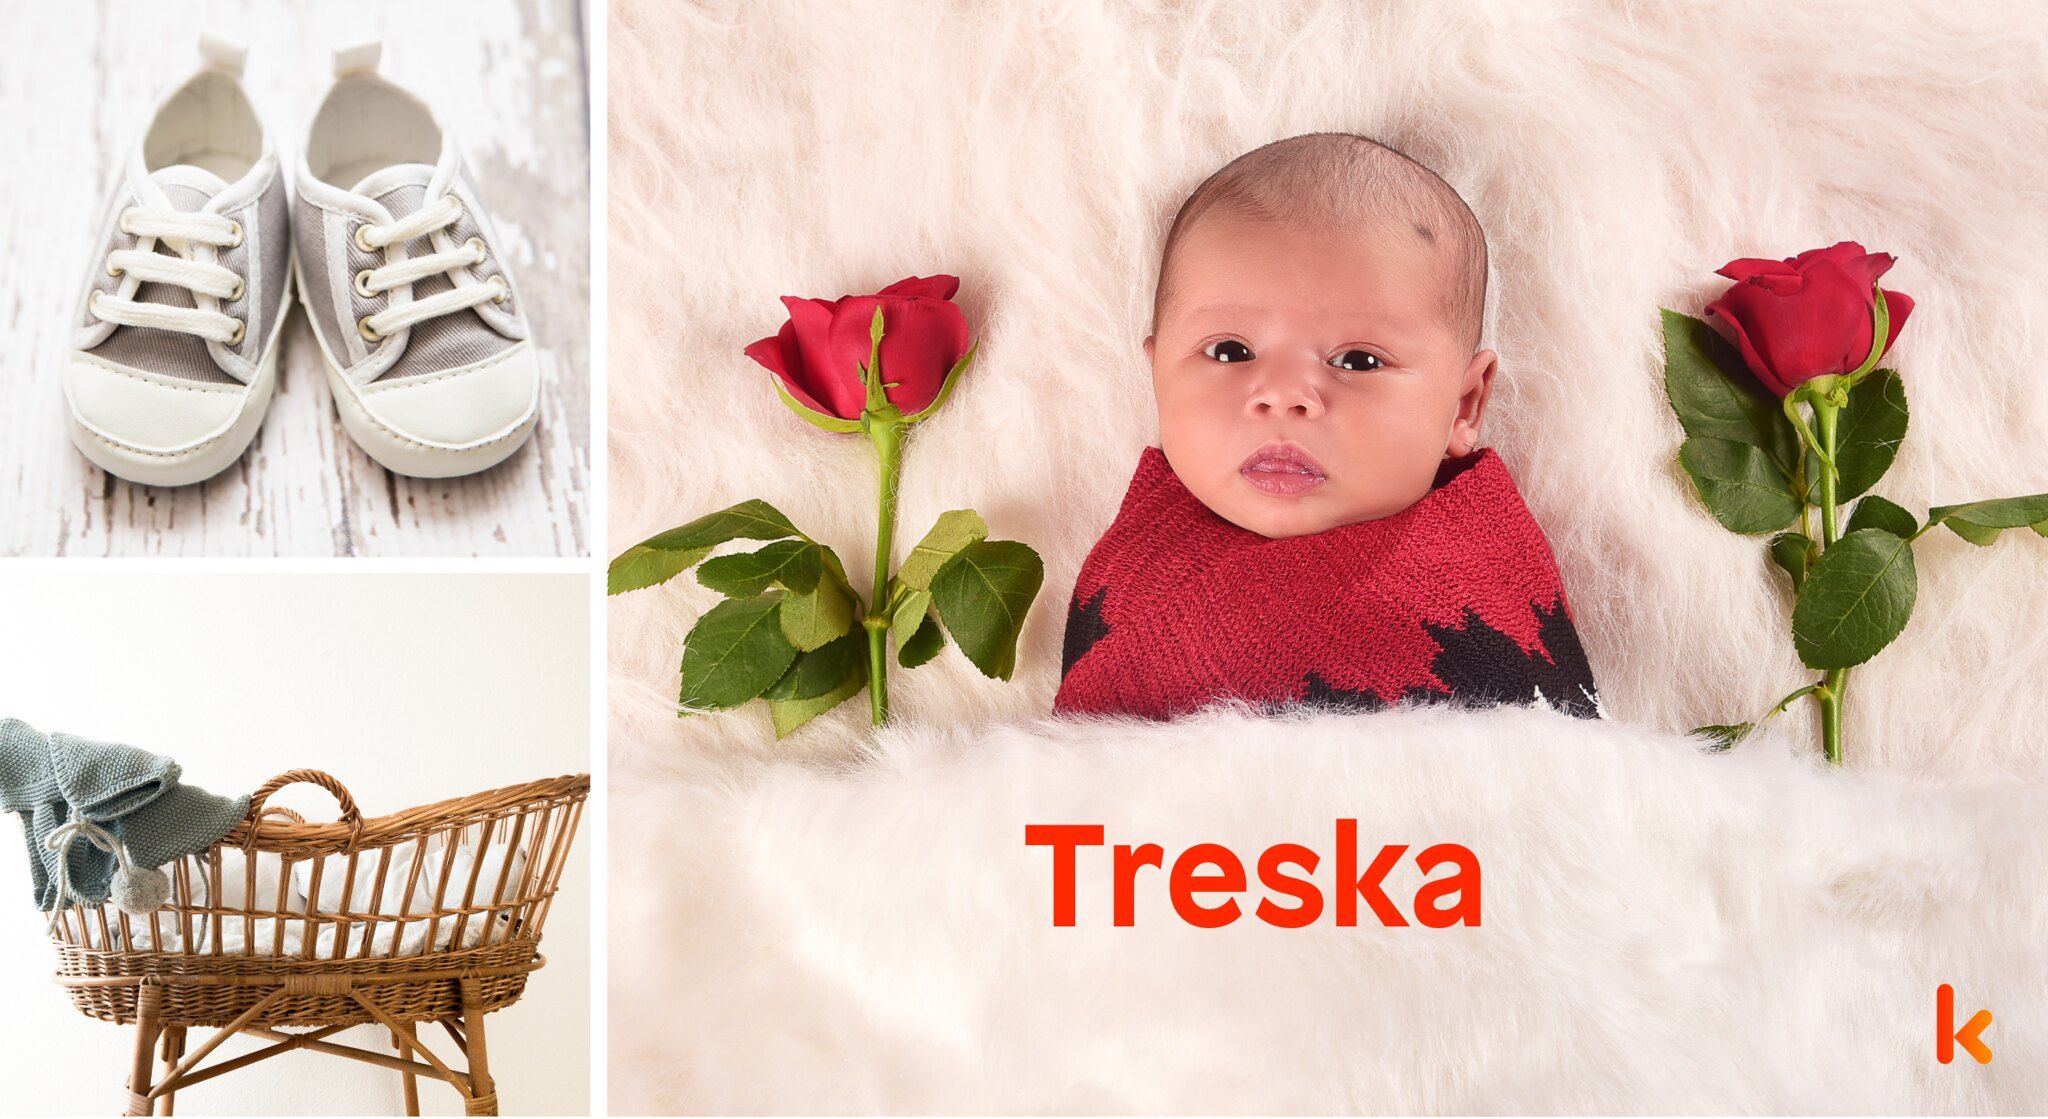 Meaning of the name Treska